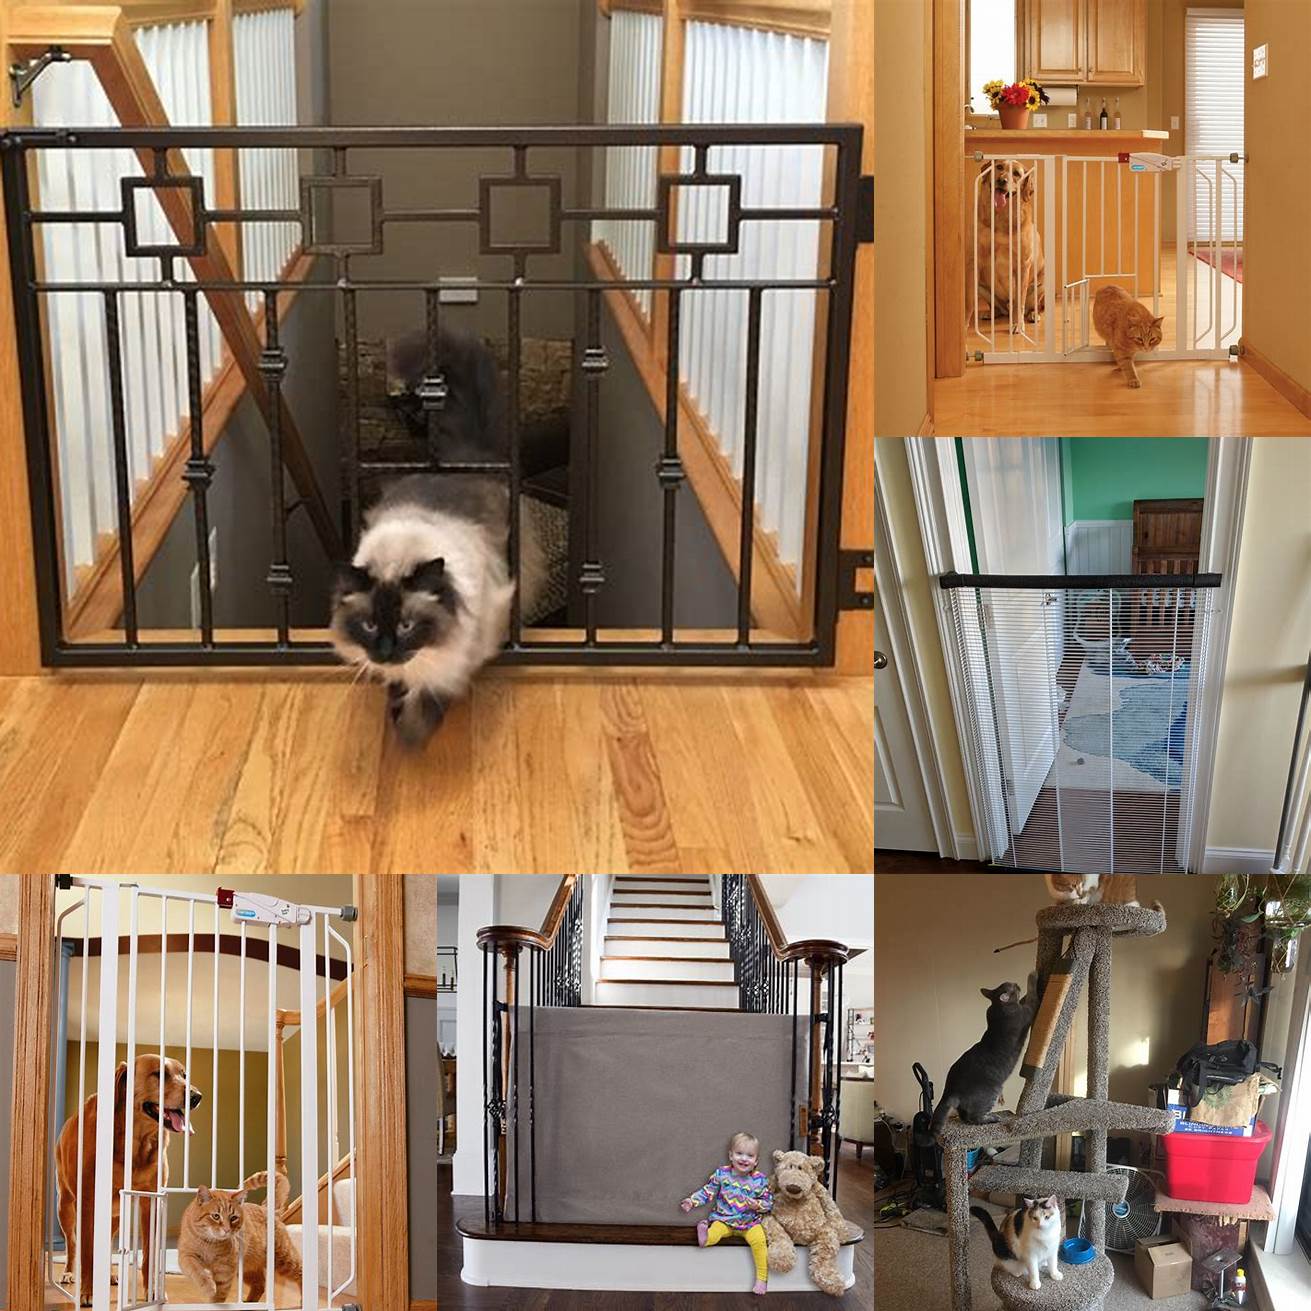 Stylish and customizable Cat gates come in a variety of styles and designs so you can choose one that matches the decor of your home